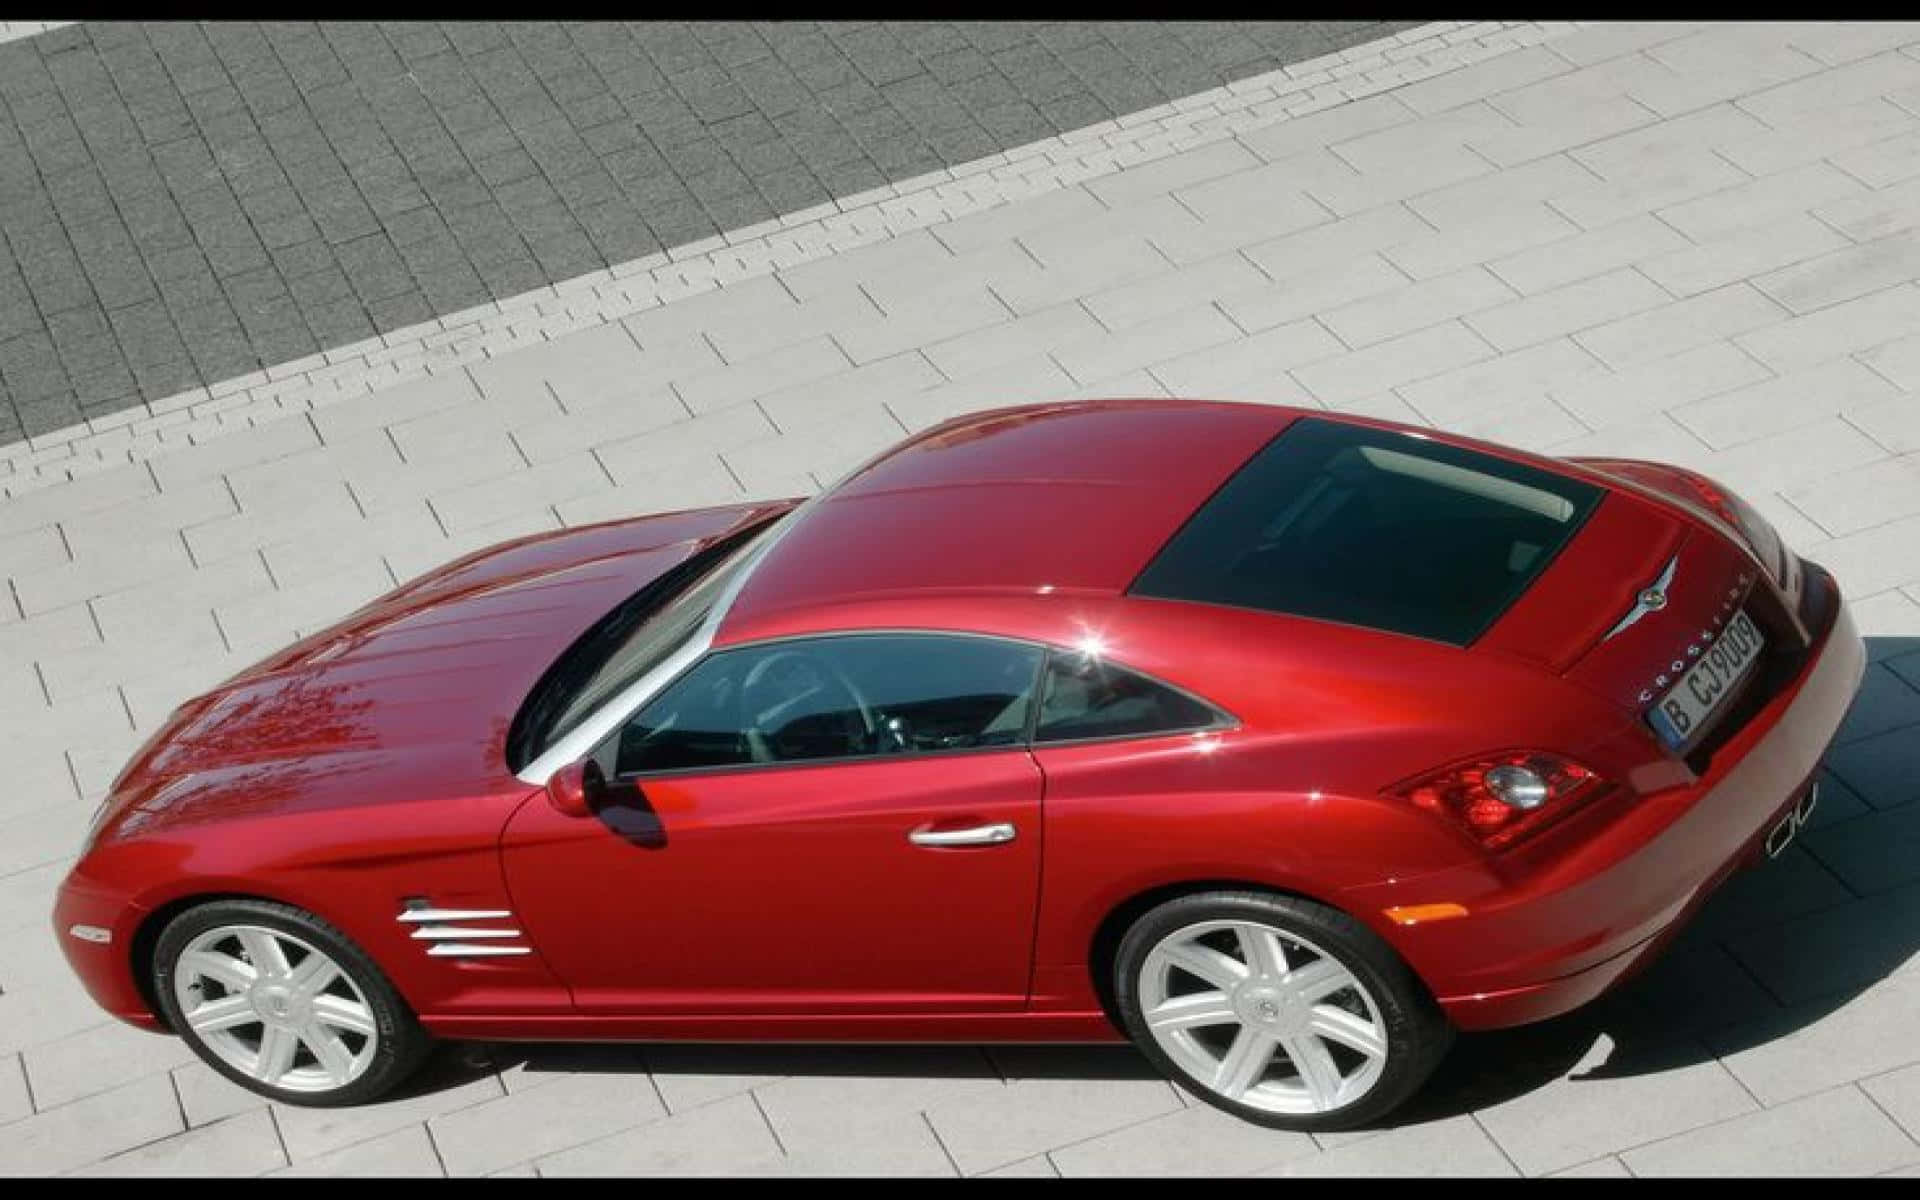 Chrysler Crossfire - A Stylish Roadster in Action Wallpaper